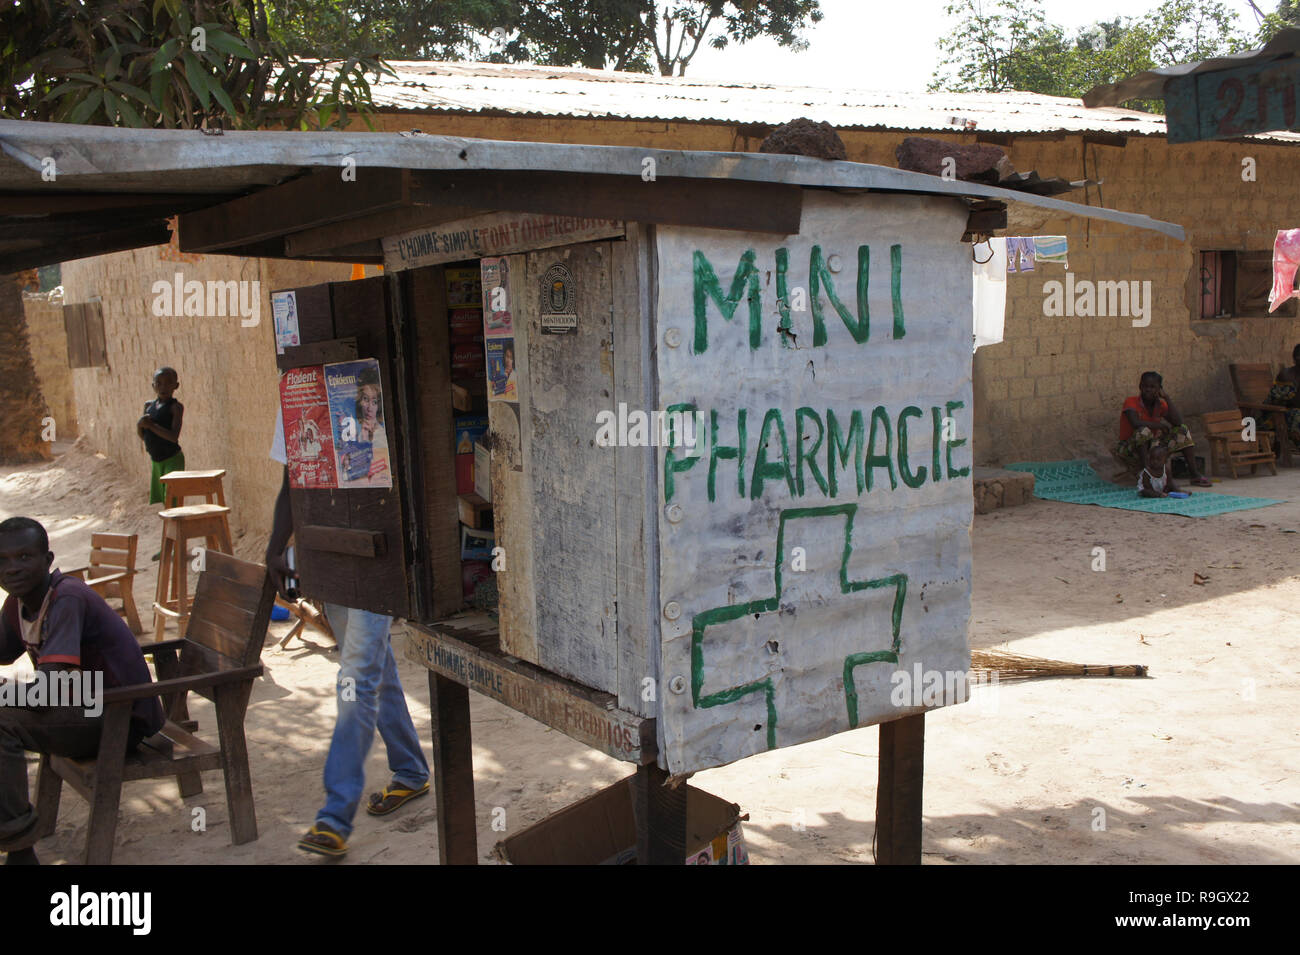 Bangui, Central African Republic, 20 Feb 2017: A roadside stall marked 'Mini Pharmacie' in the capital of the Central African Republic sells medicine Stock Photo